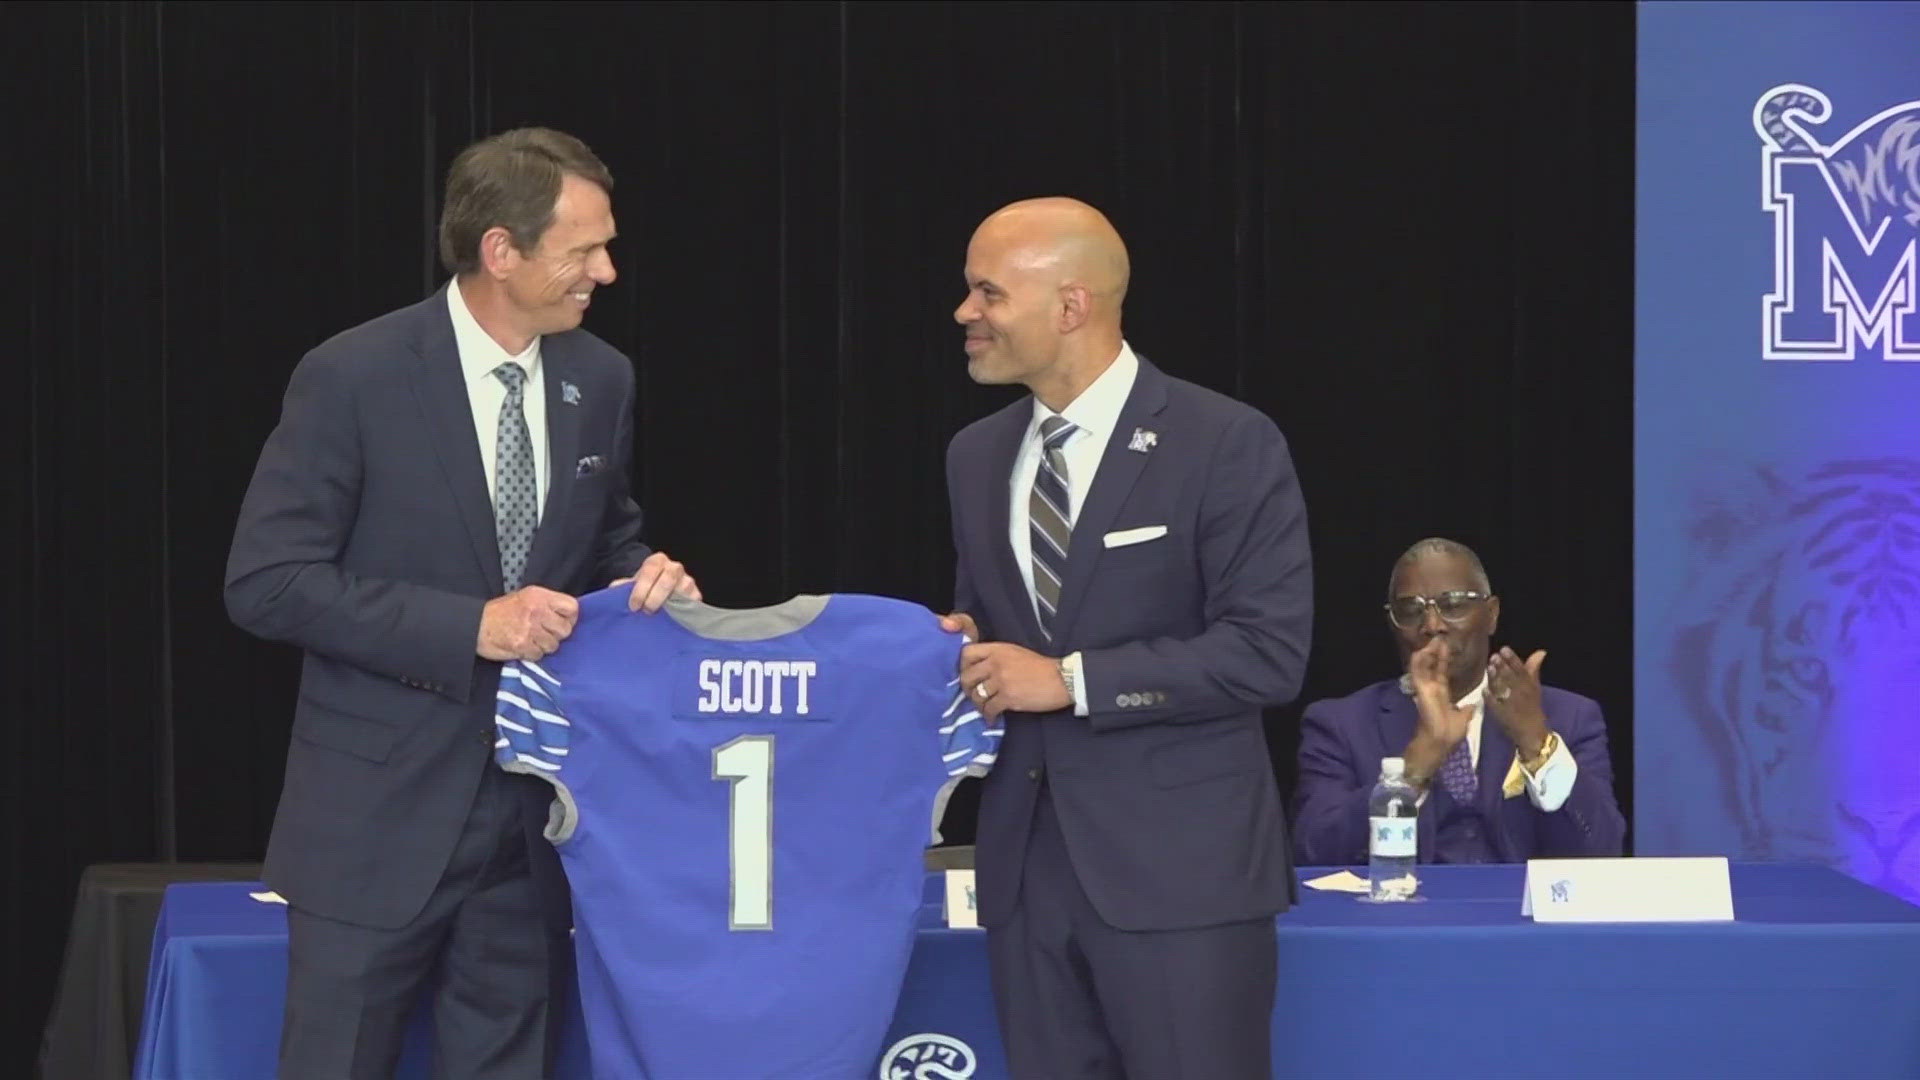 The University of Memphis introduced Dr. Ed Scott as the 8th athletic director.